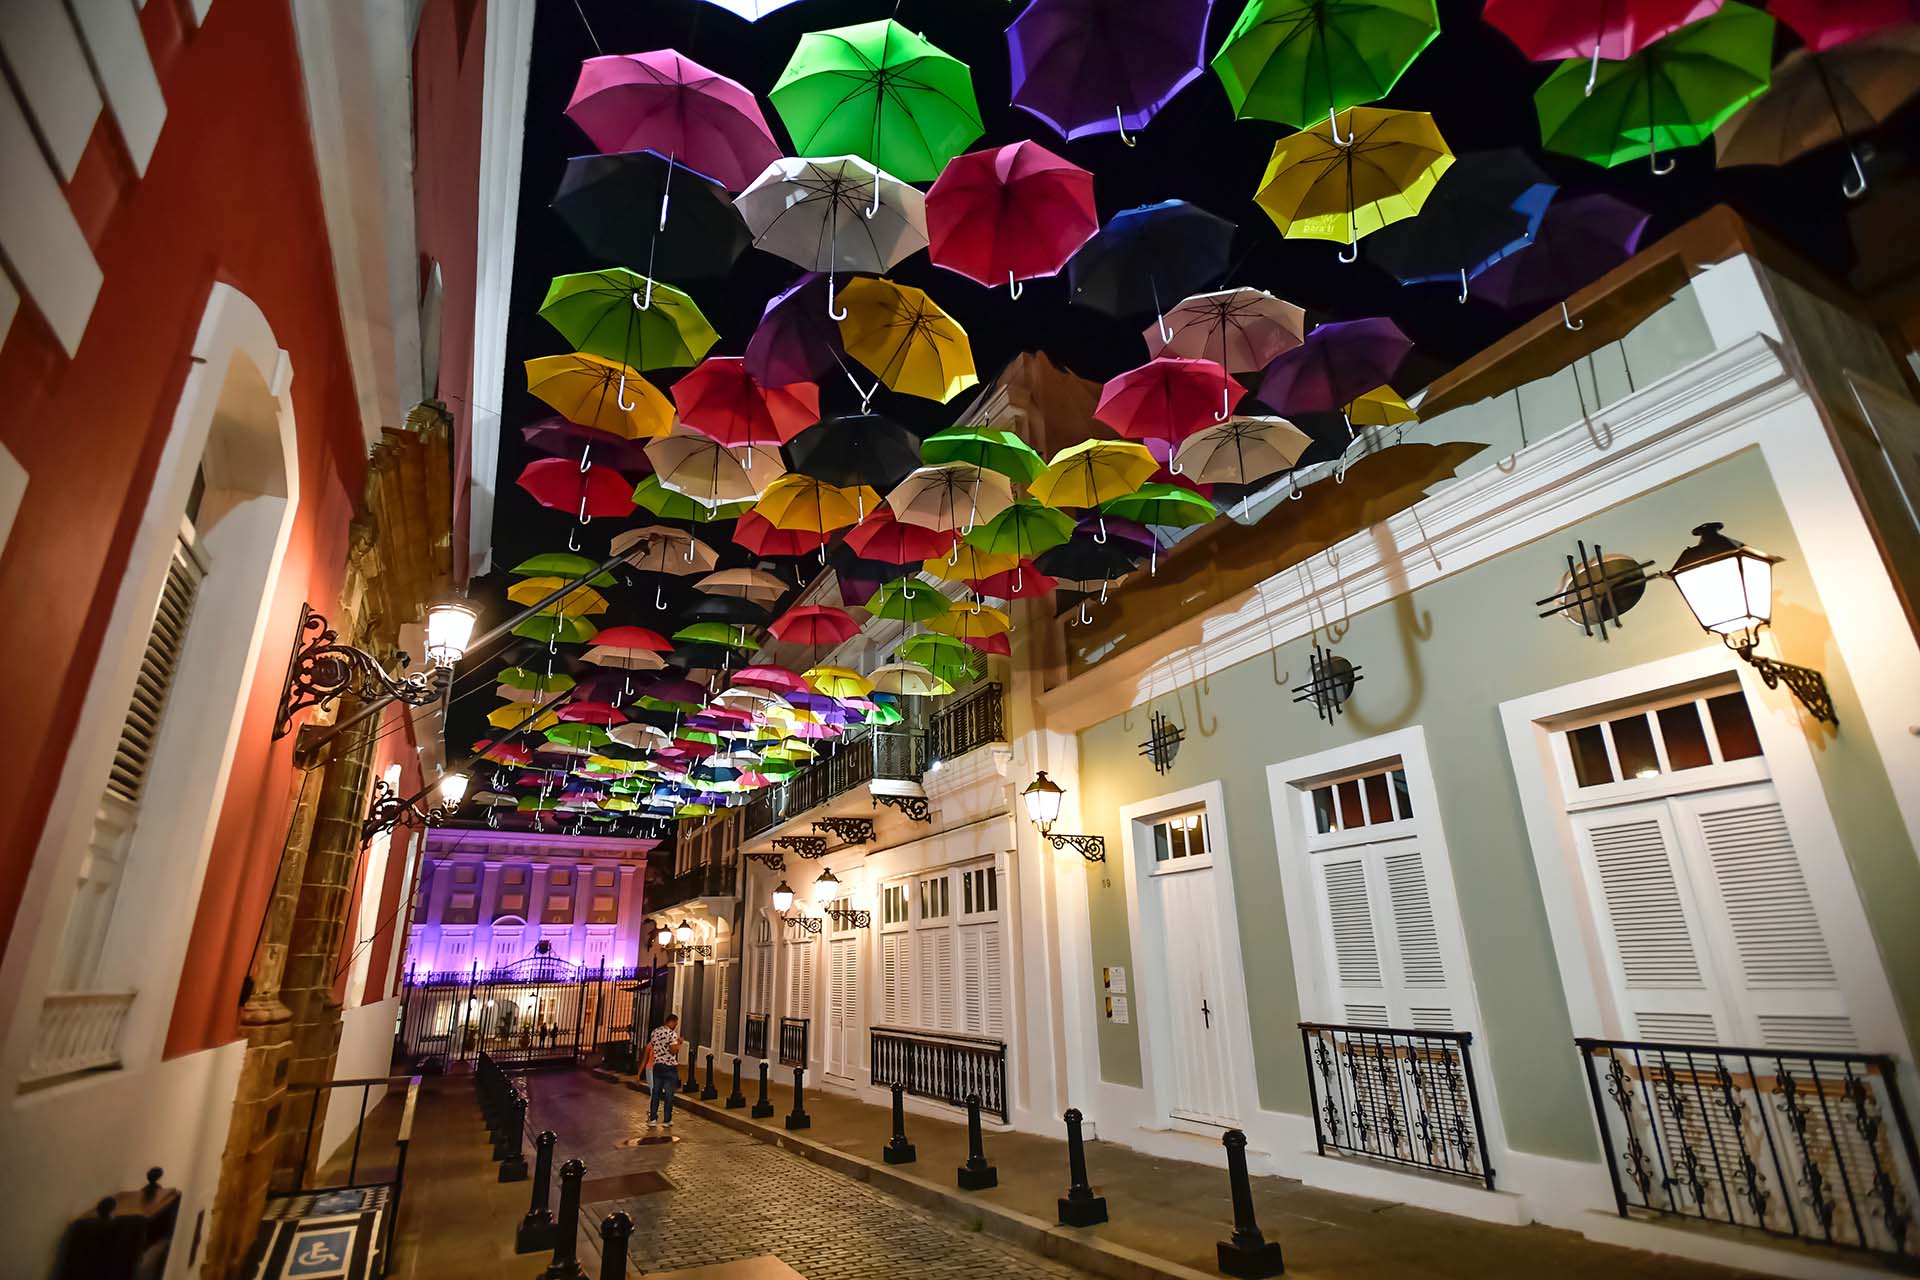 Best Hotels, Resorts, Restaurants, Bars, Clubs, Beaches & Shoppping in Old San Juan, Puerto Rico.